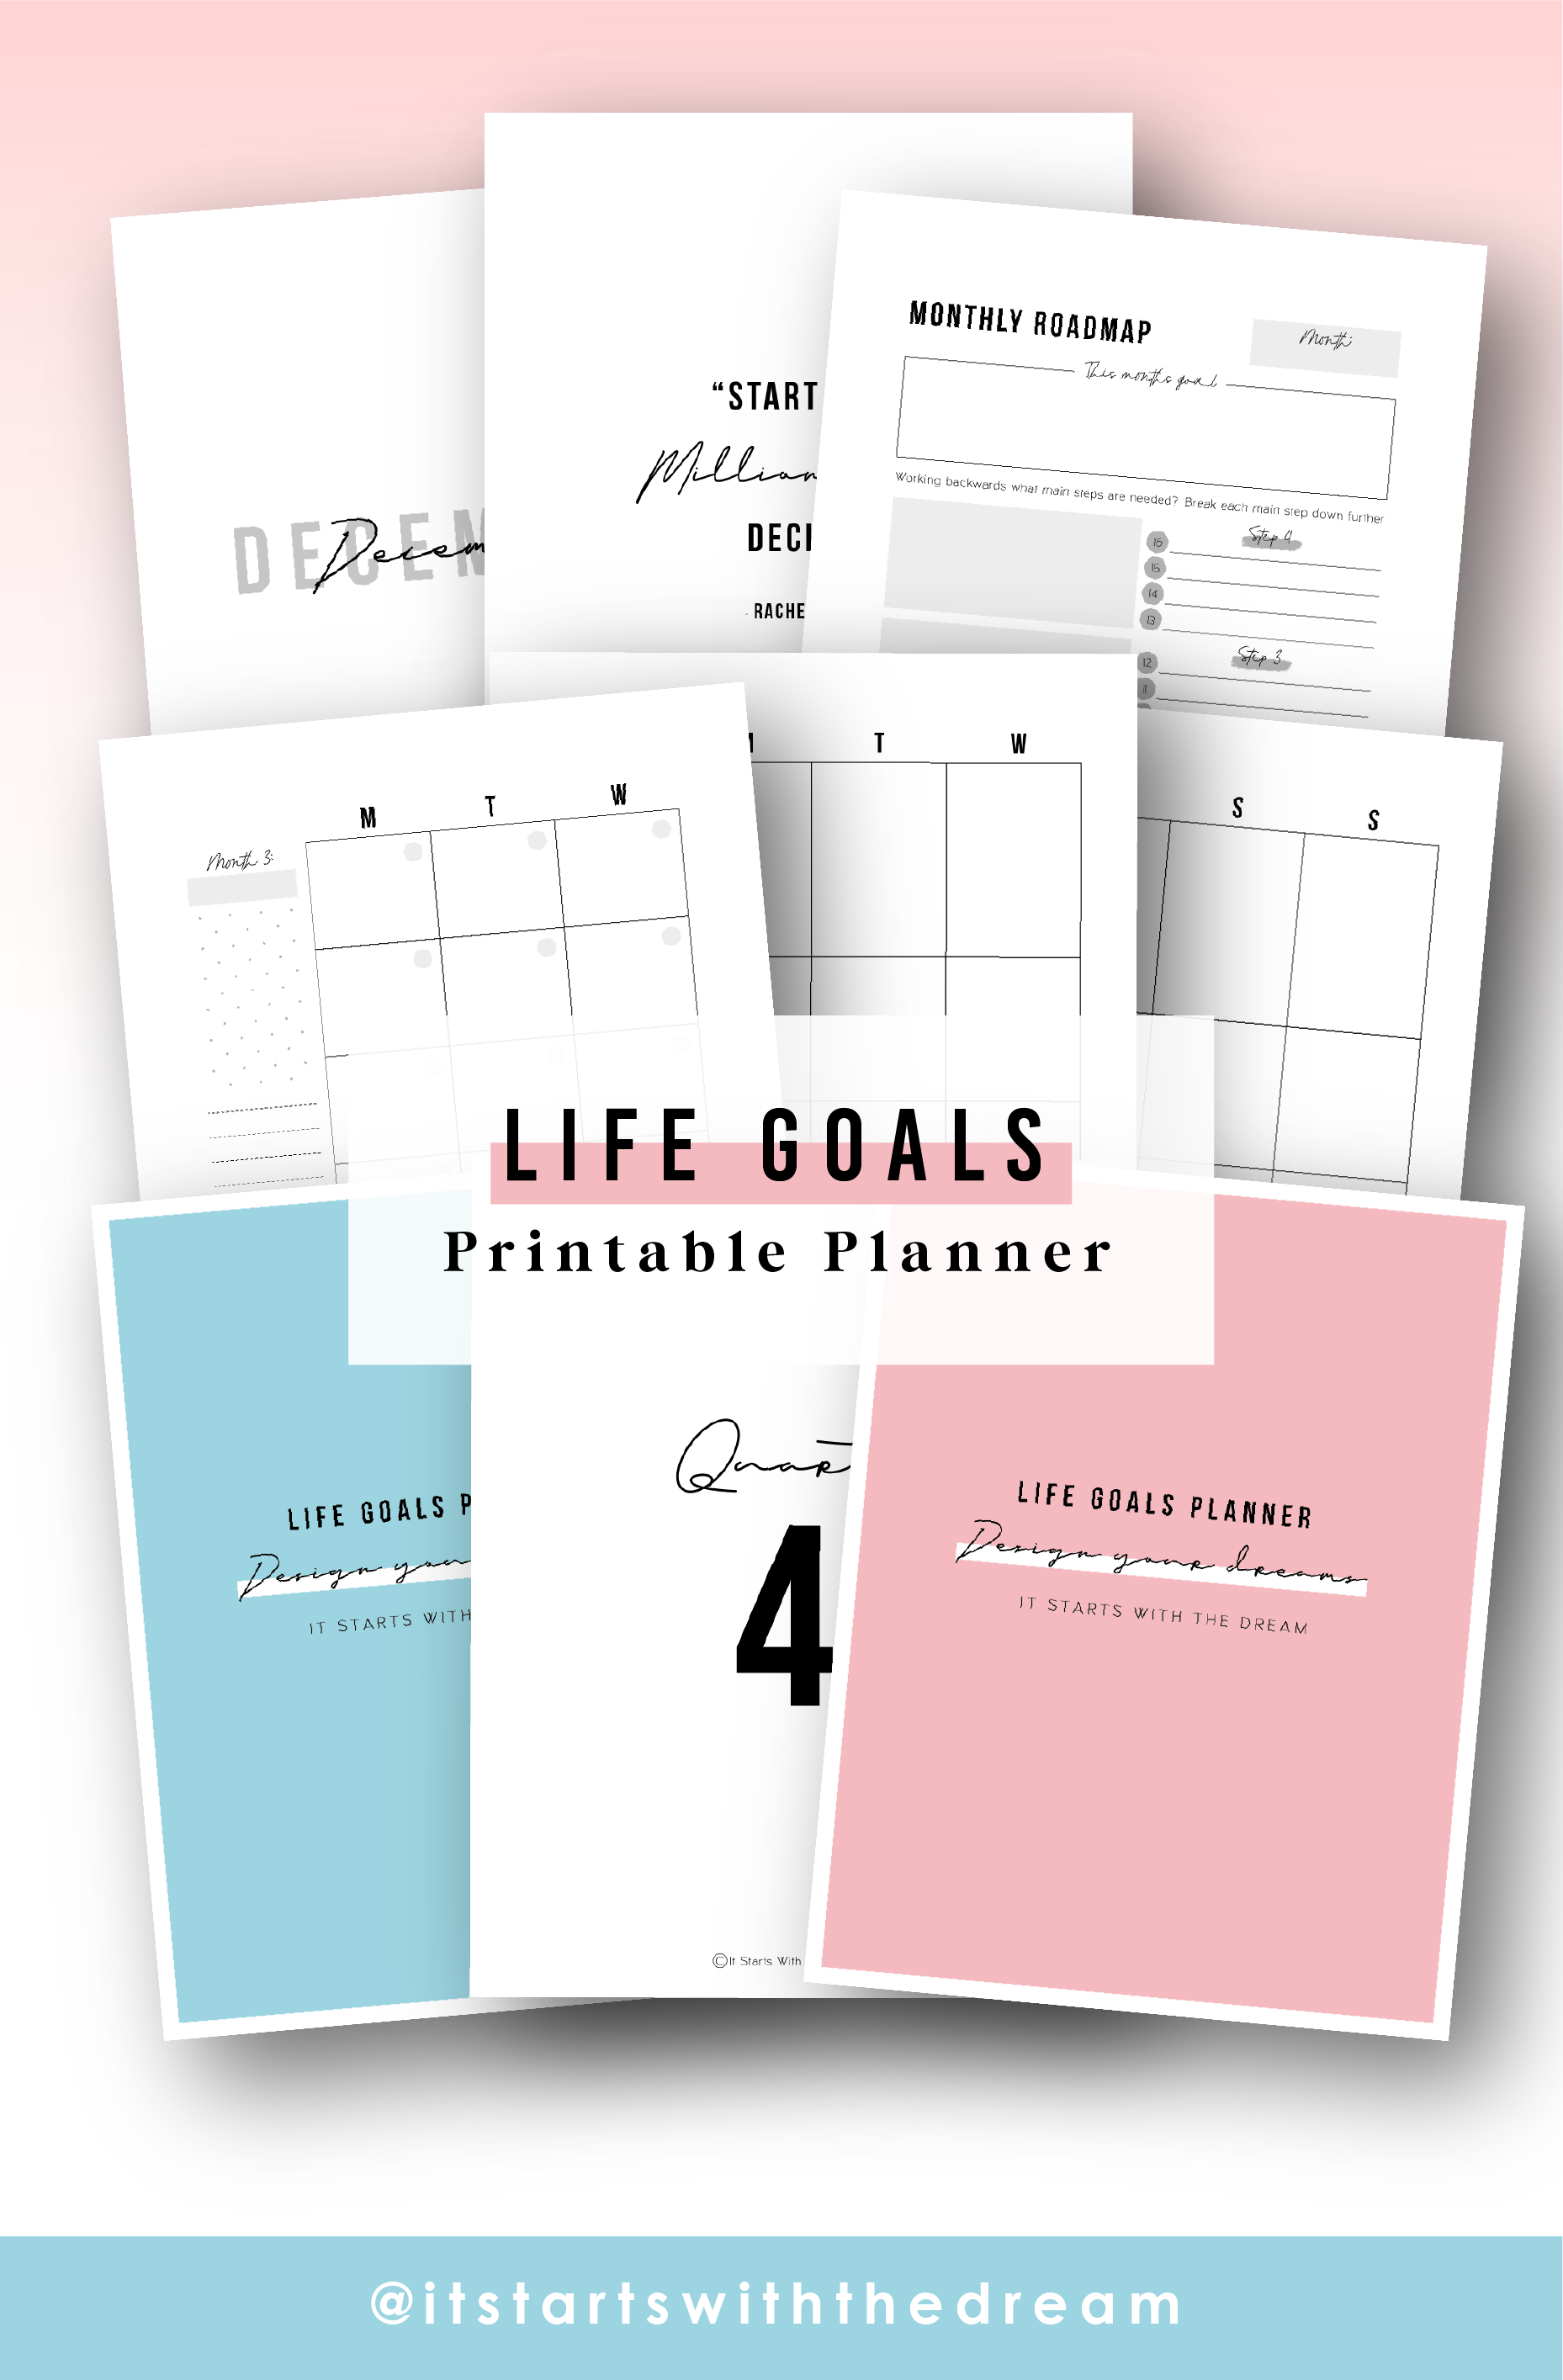 New Agenda Daily Planner Life Goal Setting Undated Weekly Monthly